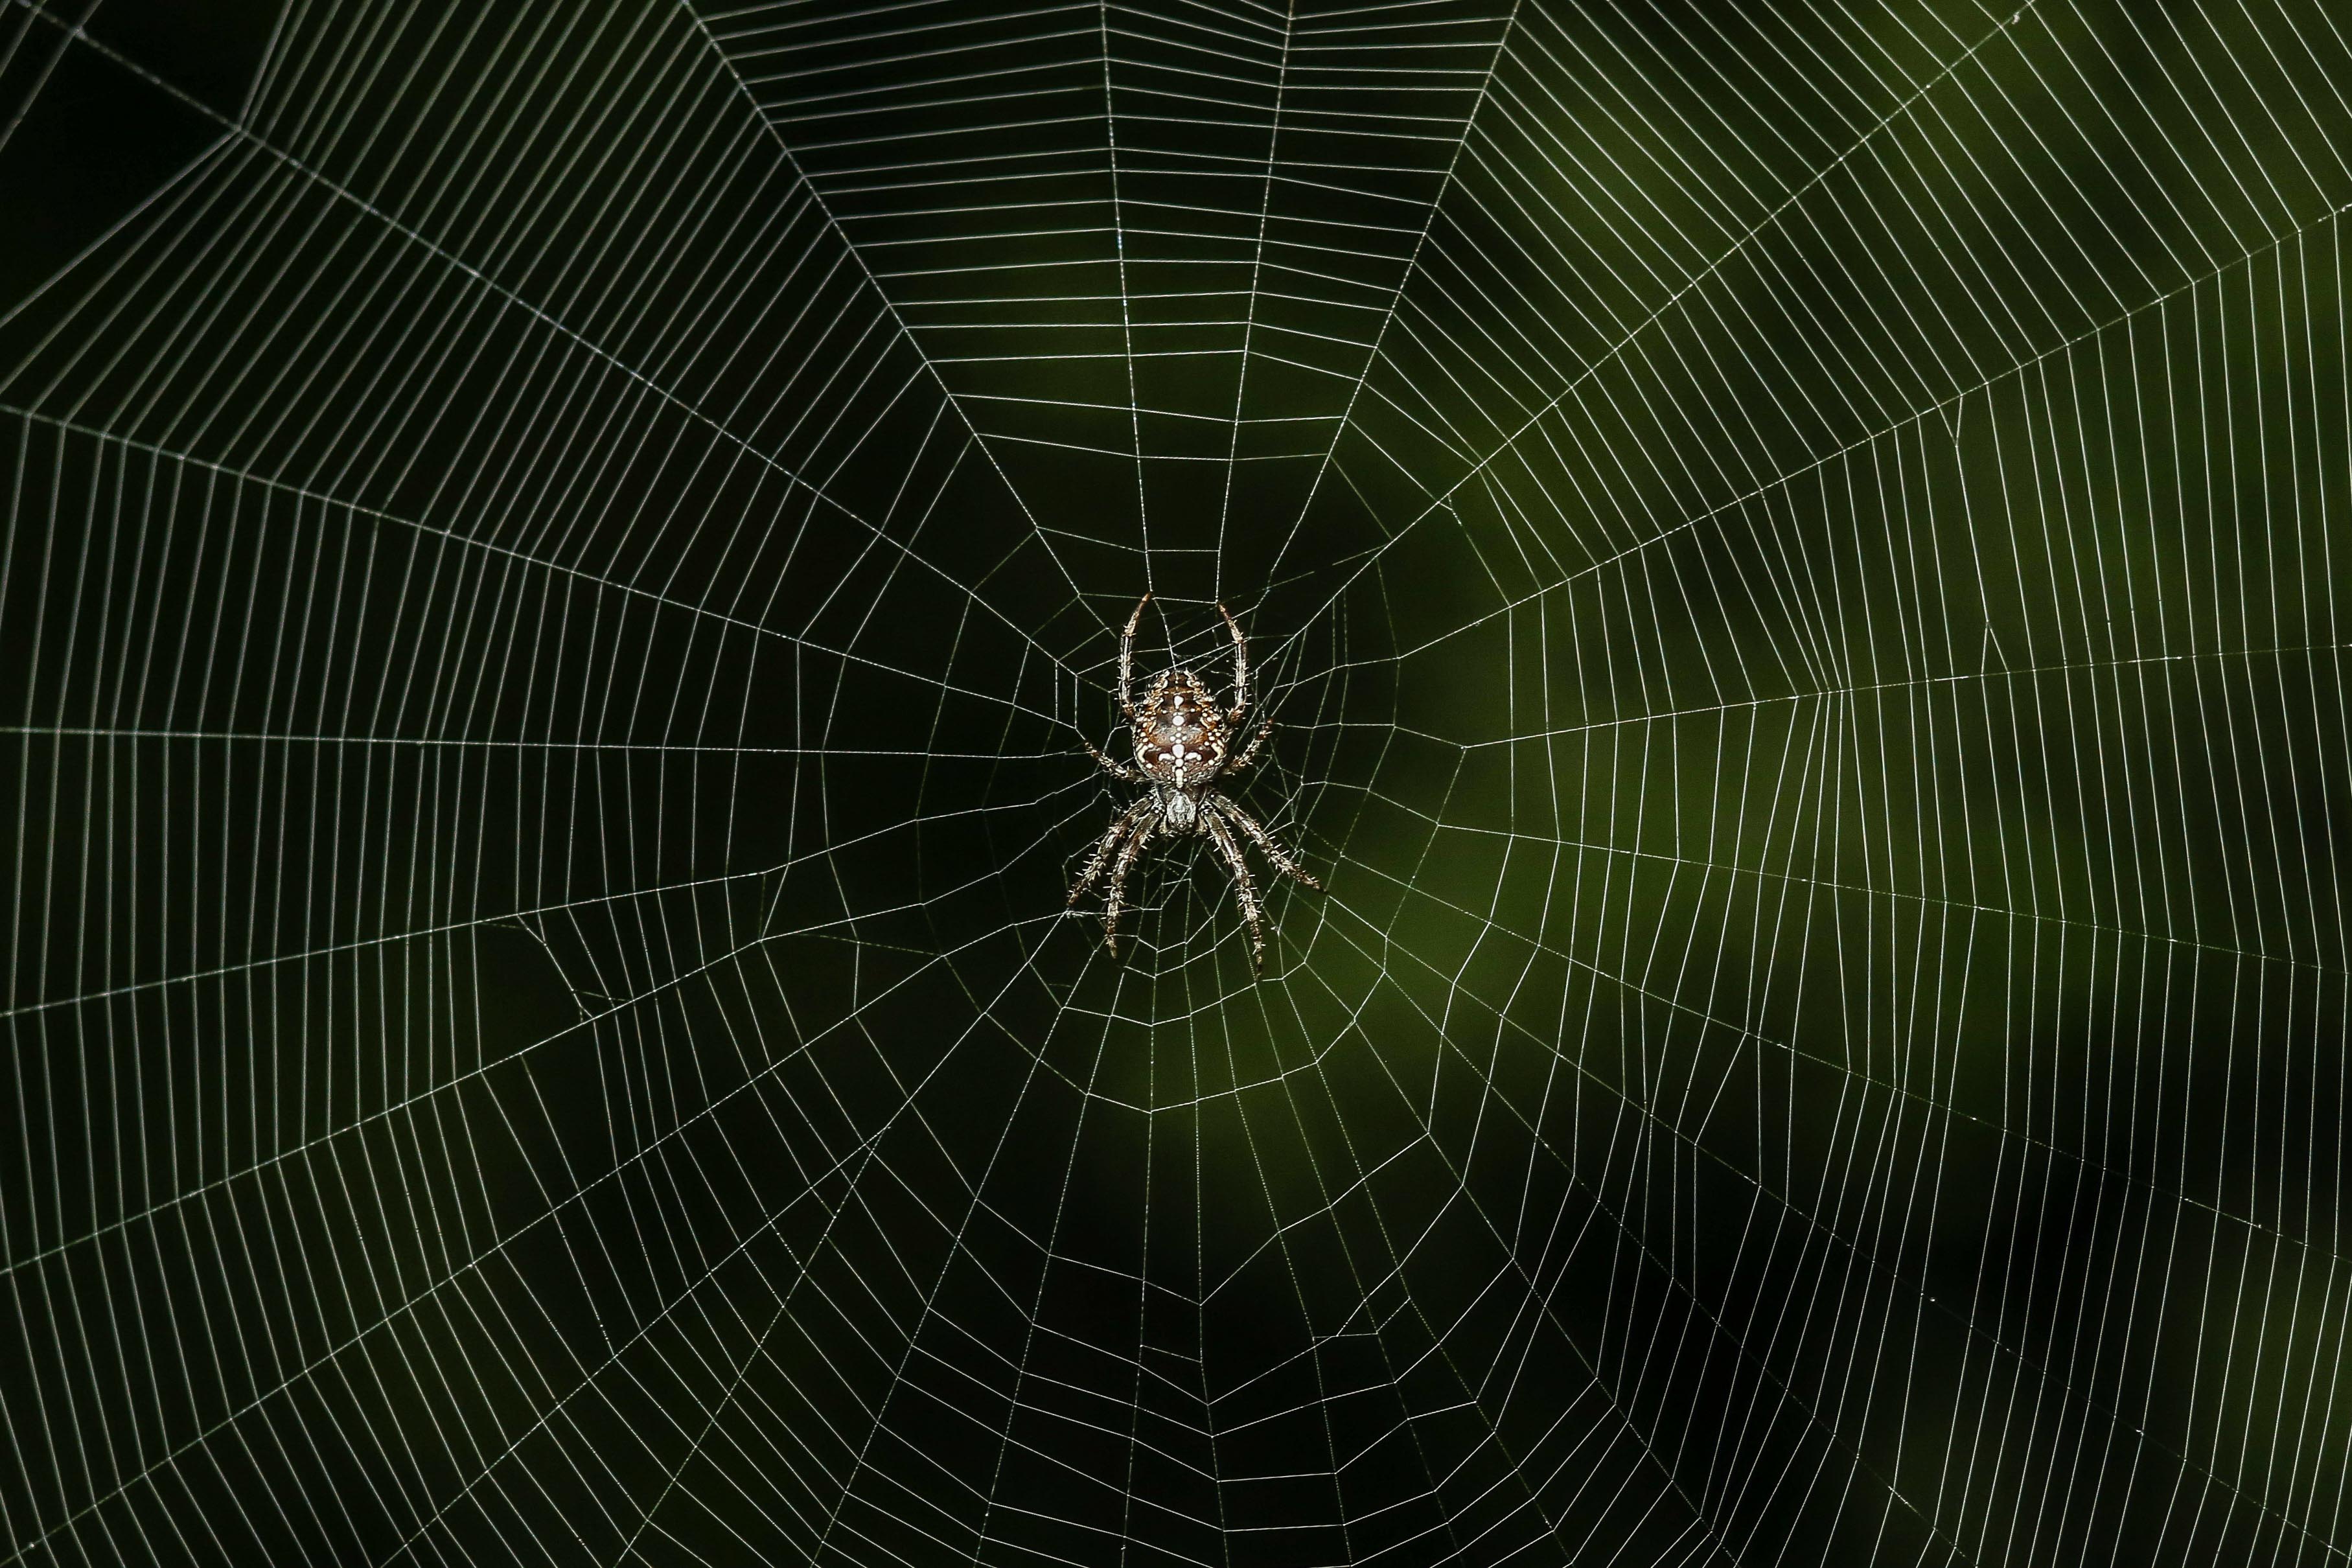 Spiders pictures. Spider picture. Internet as a Spider pictures.